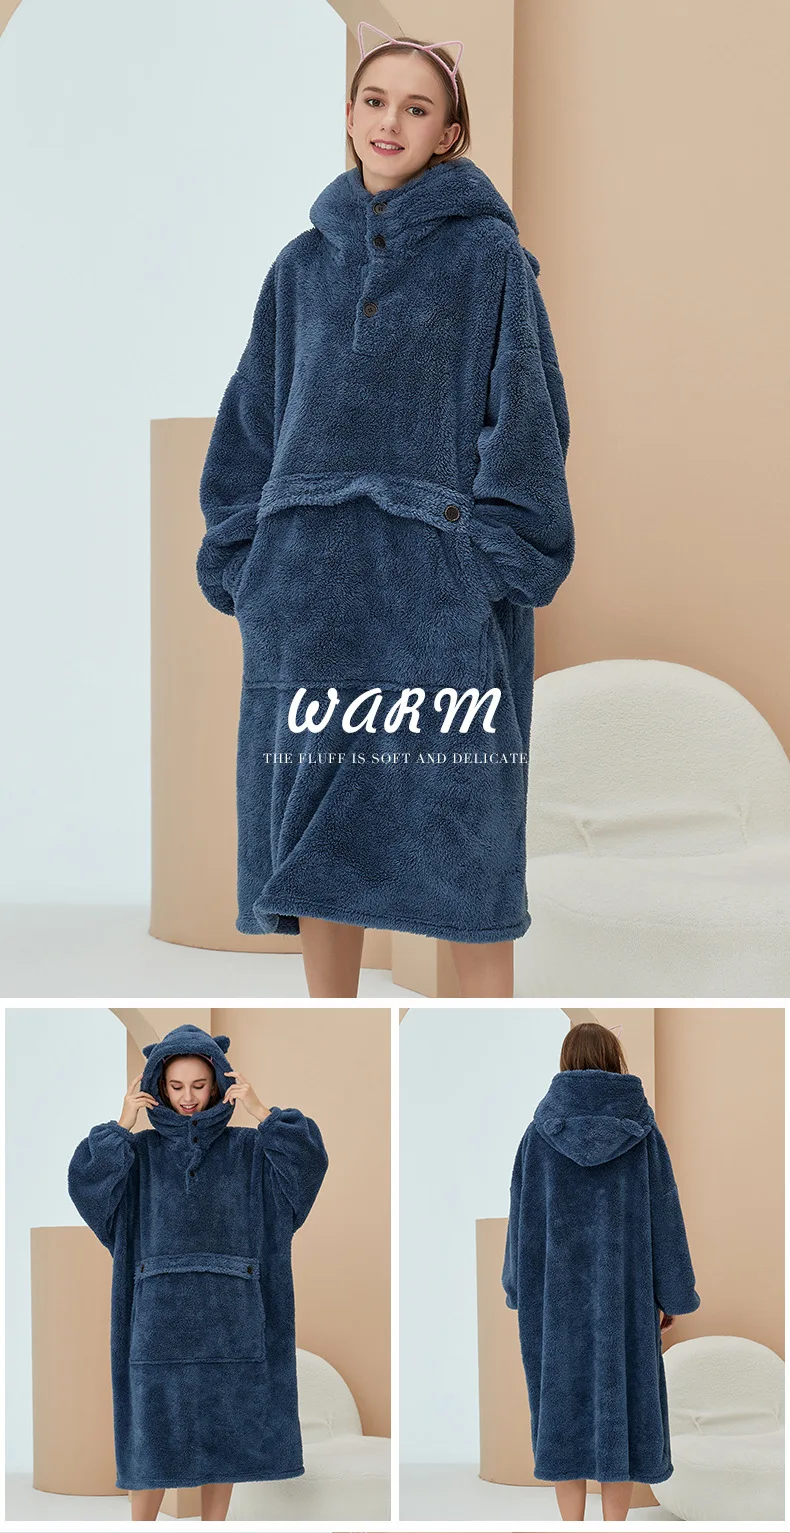 Unisex Robes Men Winter Dressing Gown Winter Warm Fleece Robe Pullover Hooded Women Winter Dressing Gown Robes Soft Bathrobe red pajama pants